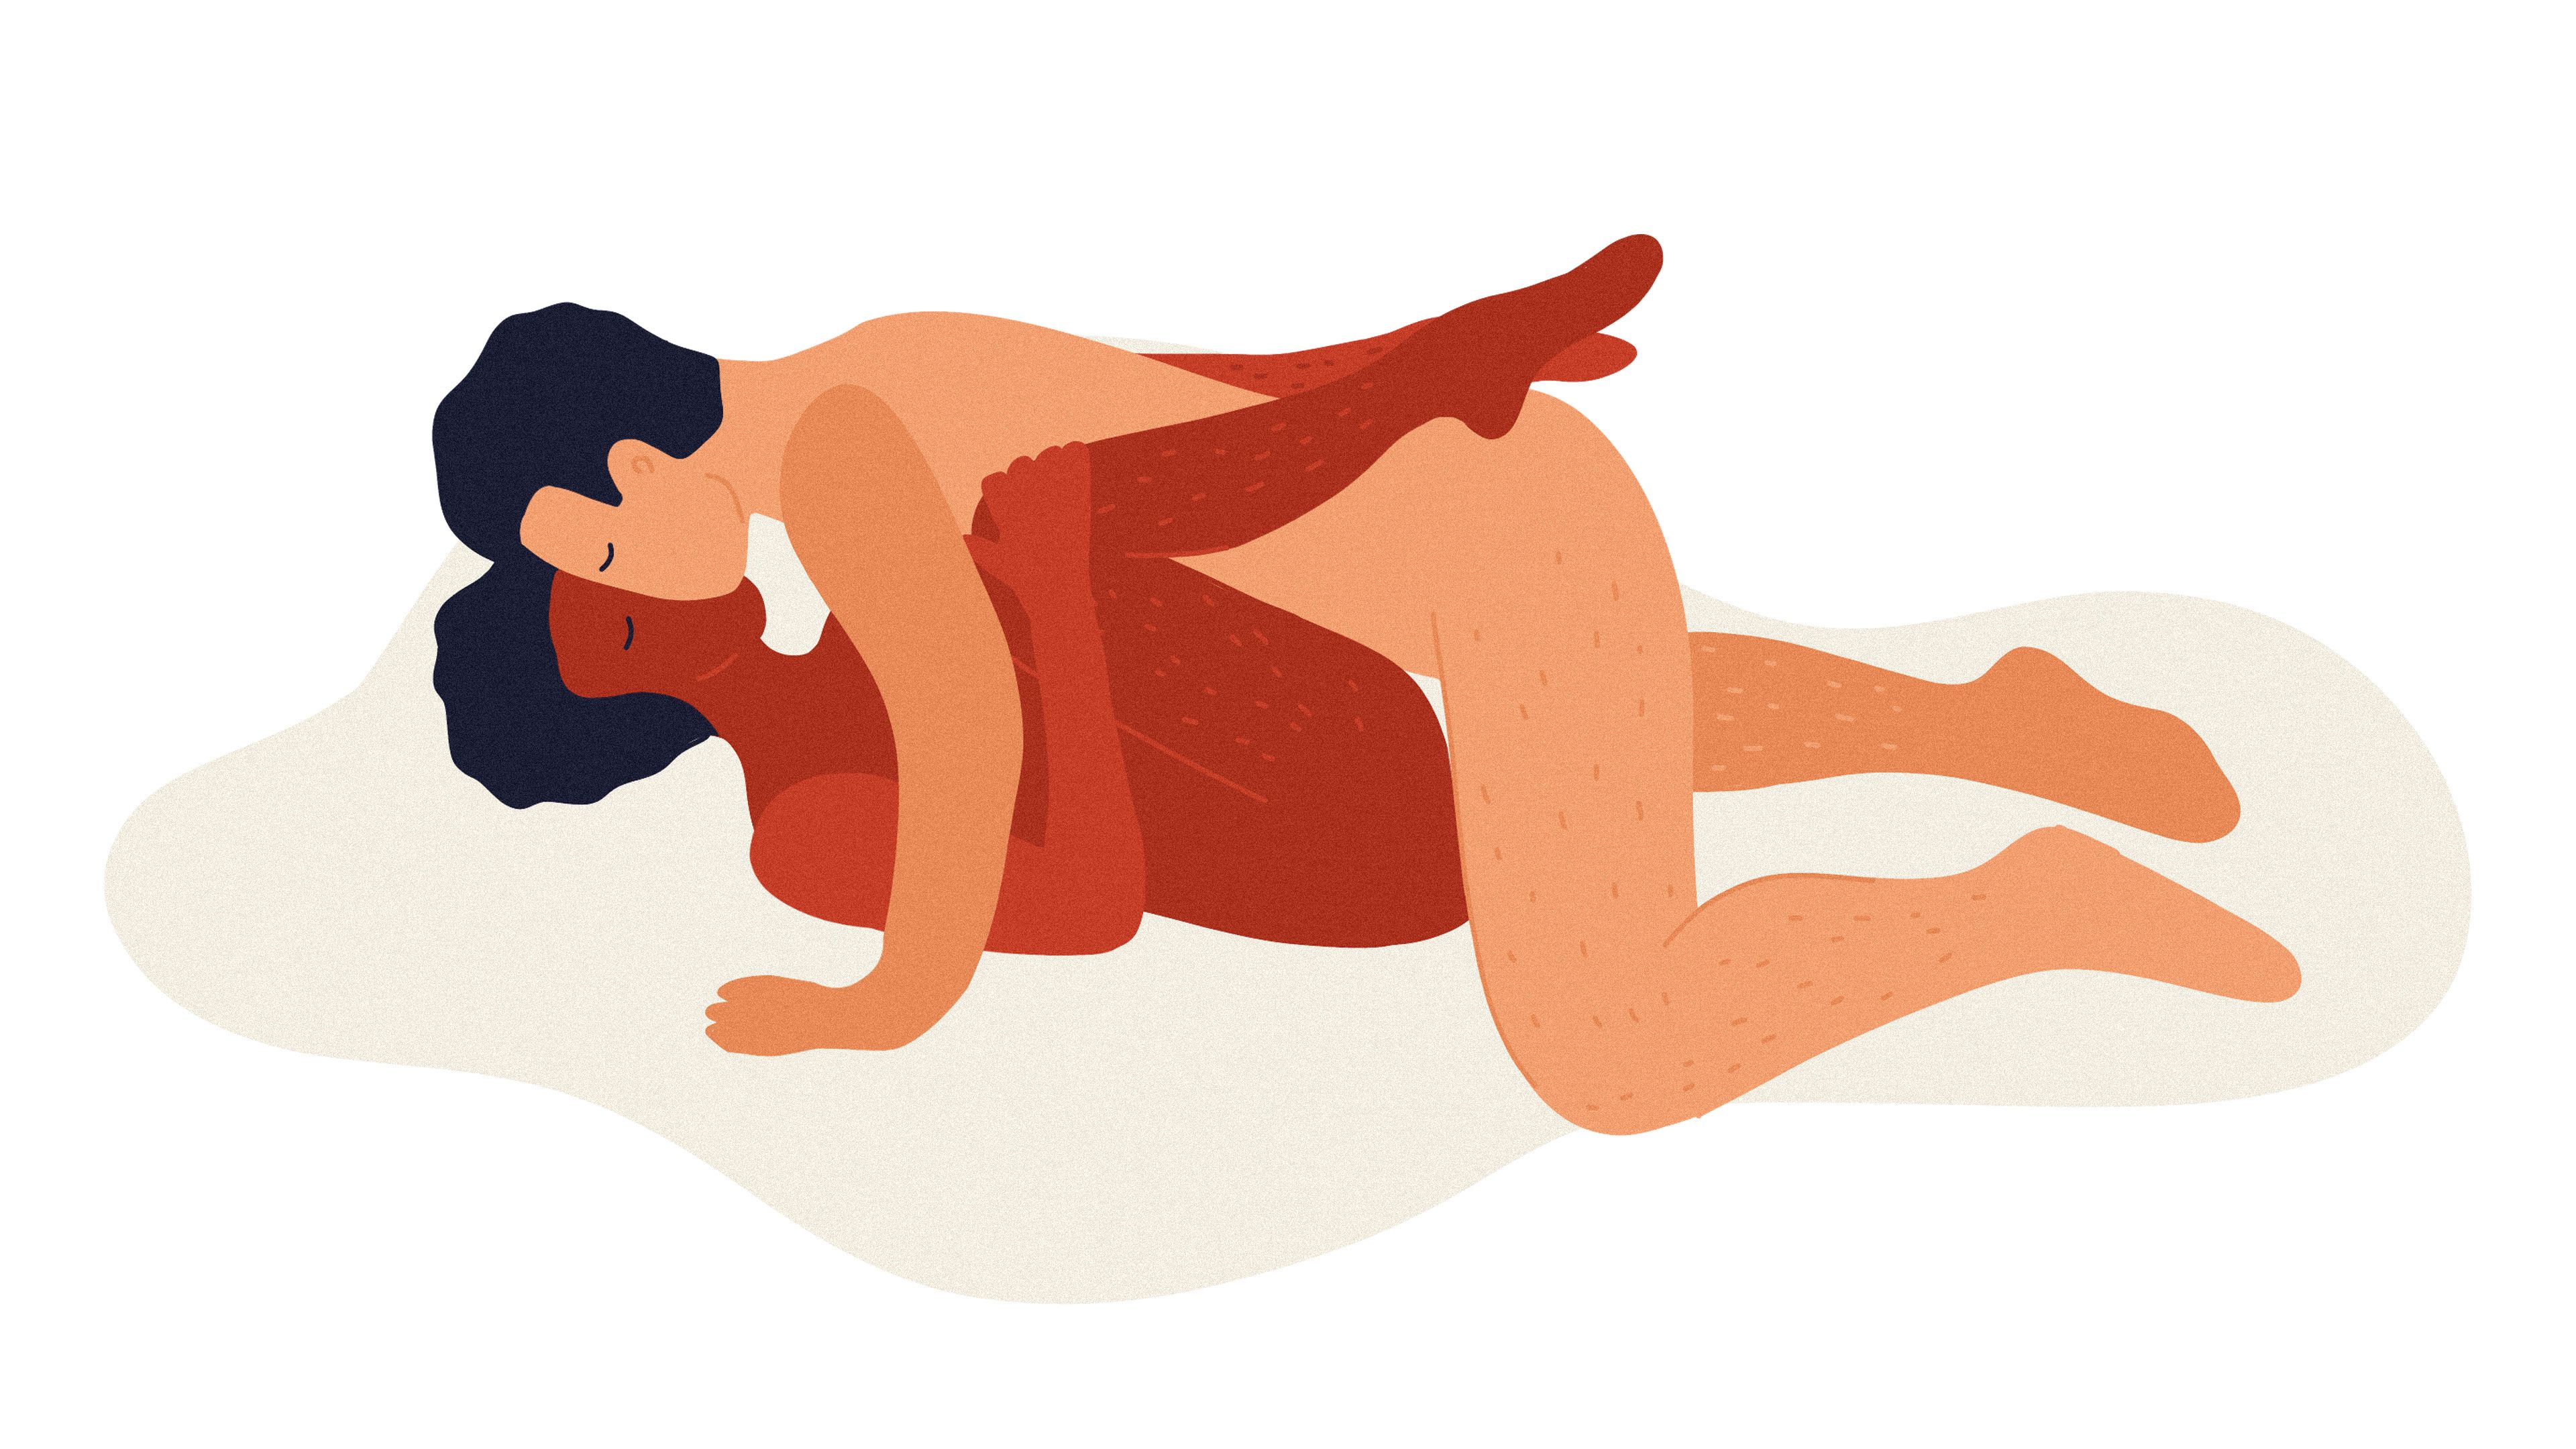 18 Missionary Sex Positions - How to Have Missionary Style Sex